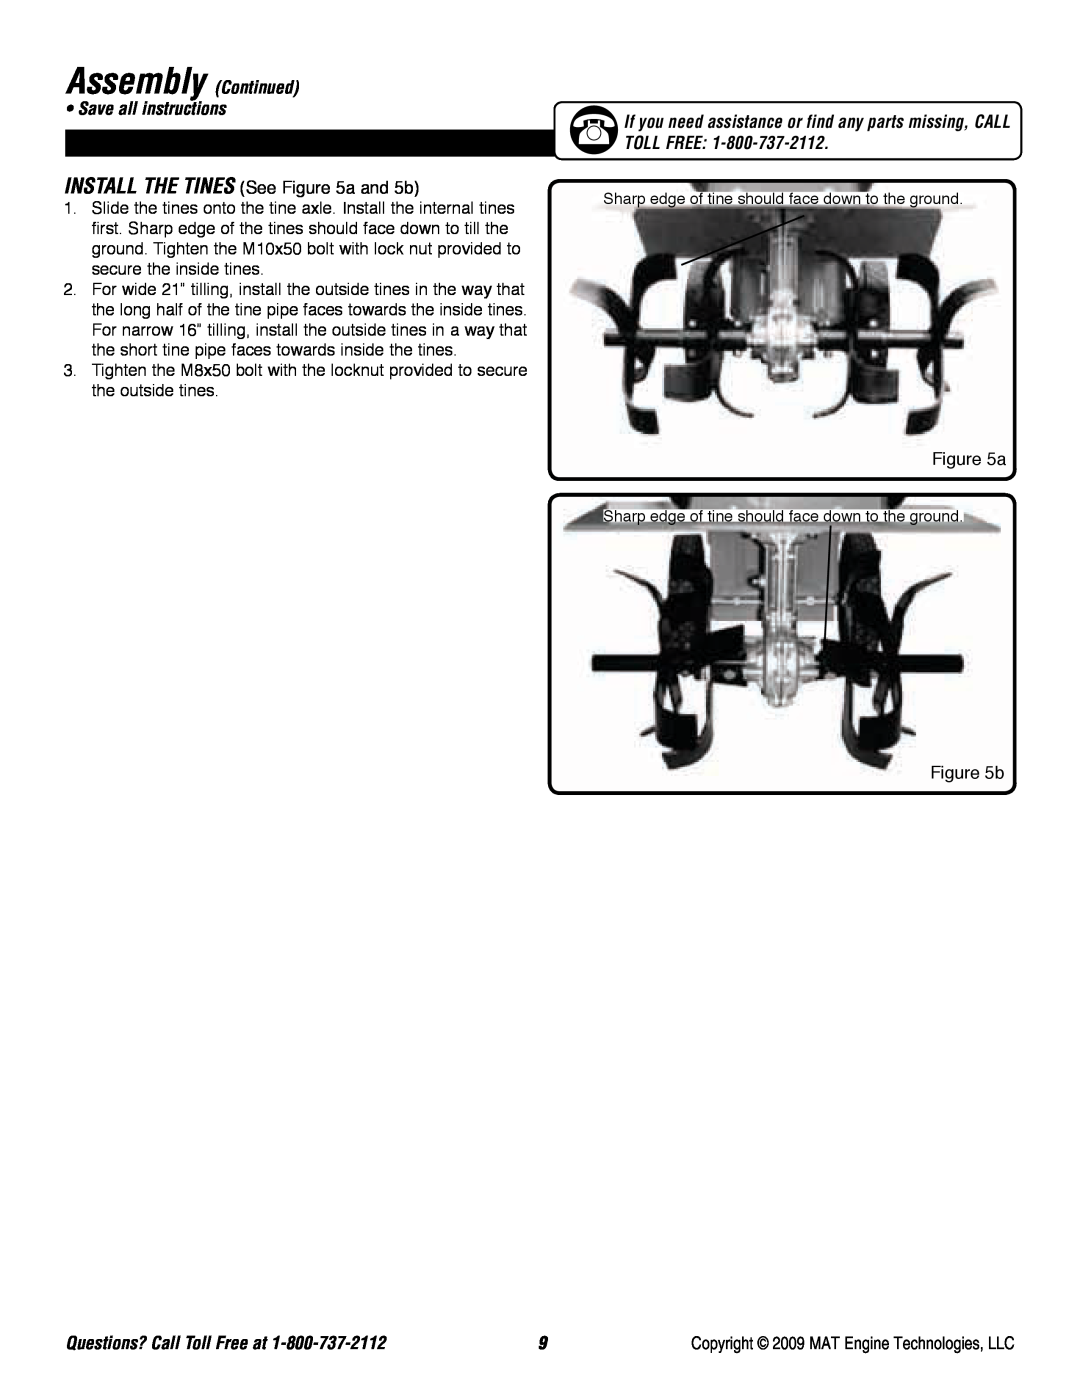 Powermate P-FTT-160MD-[E] specifications Assembly Continued Save all instructions, INSTALL THE TINES See a and 5b 